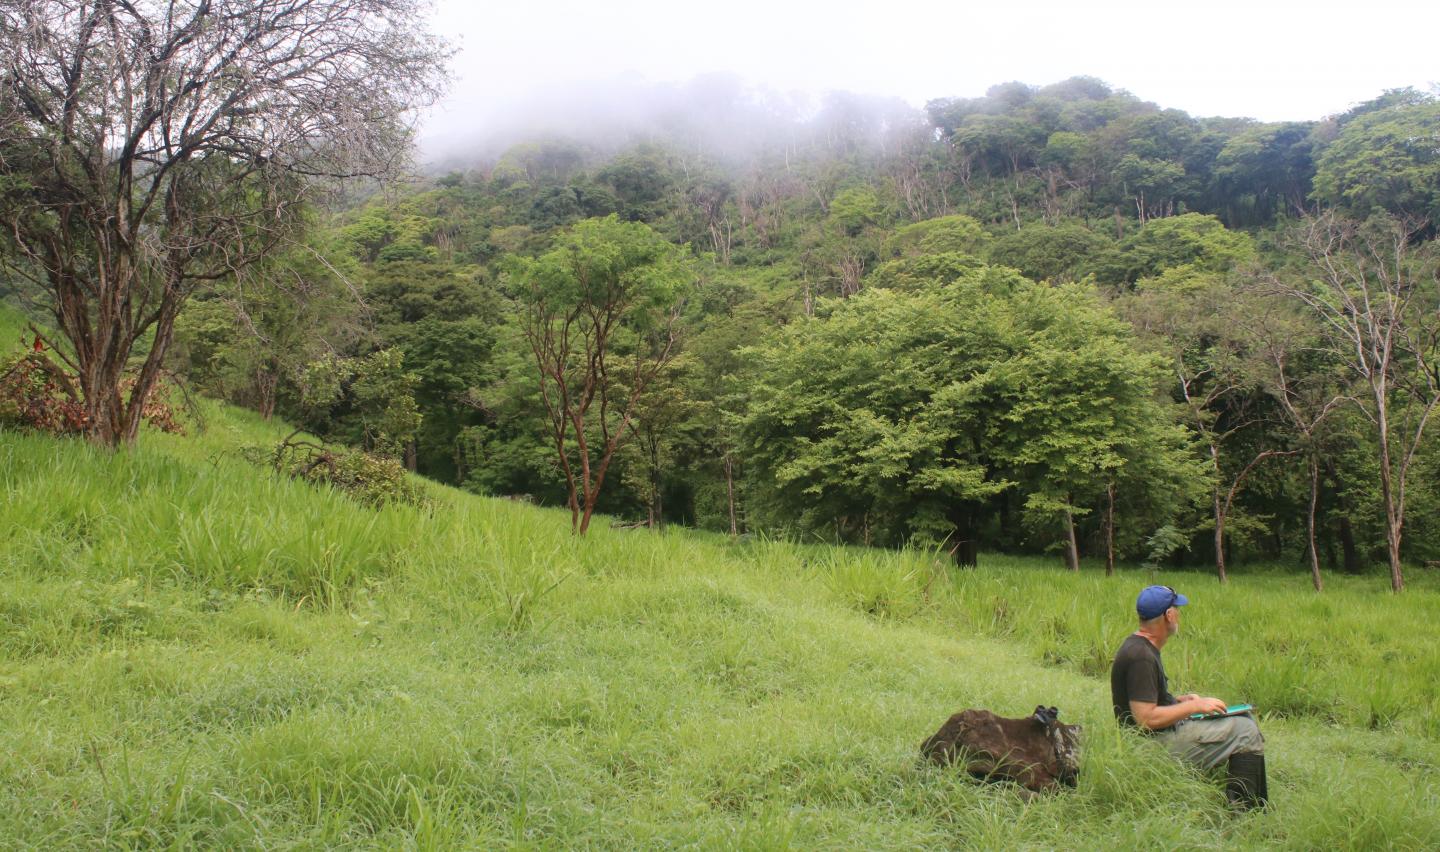 Ornithologist and cow in Costa Rica